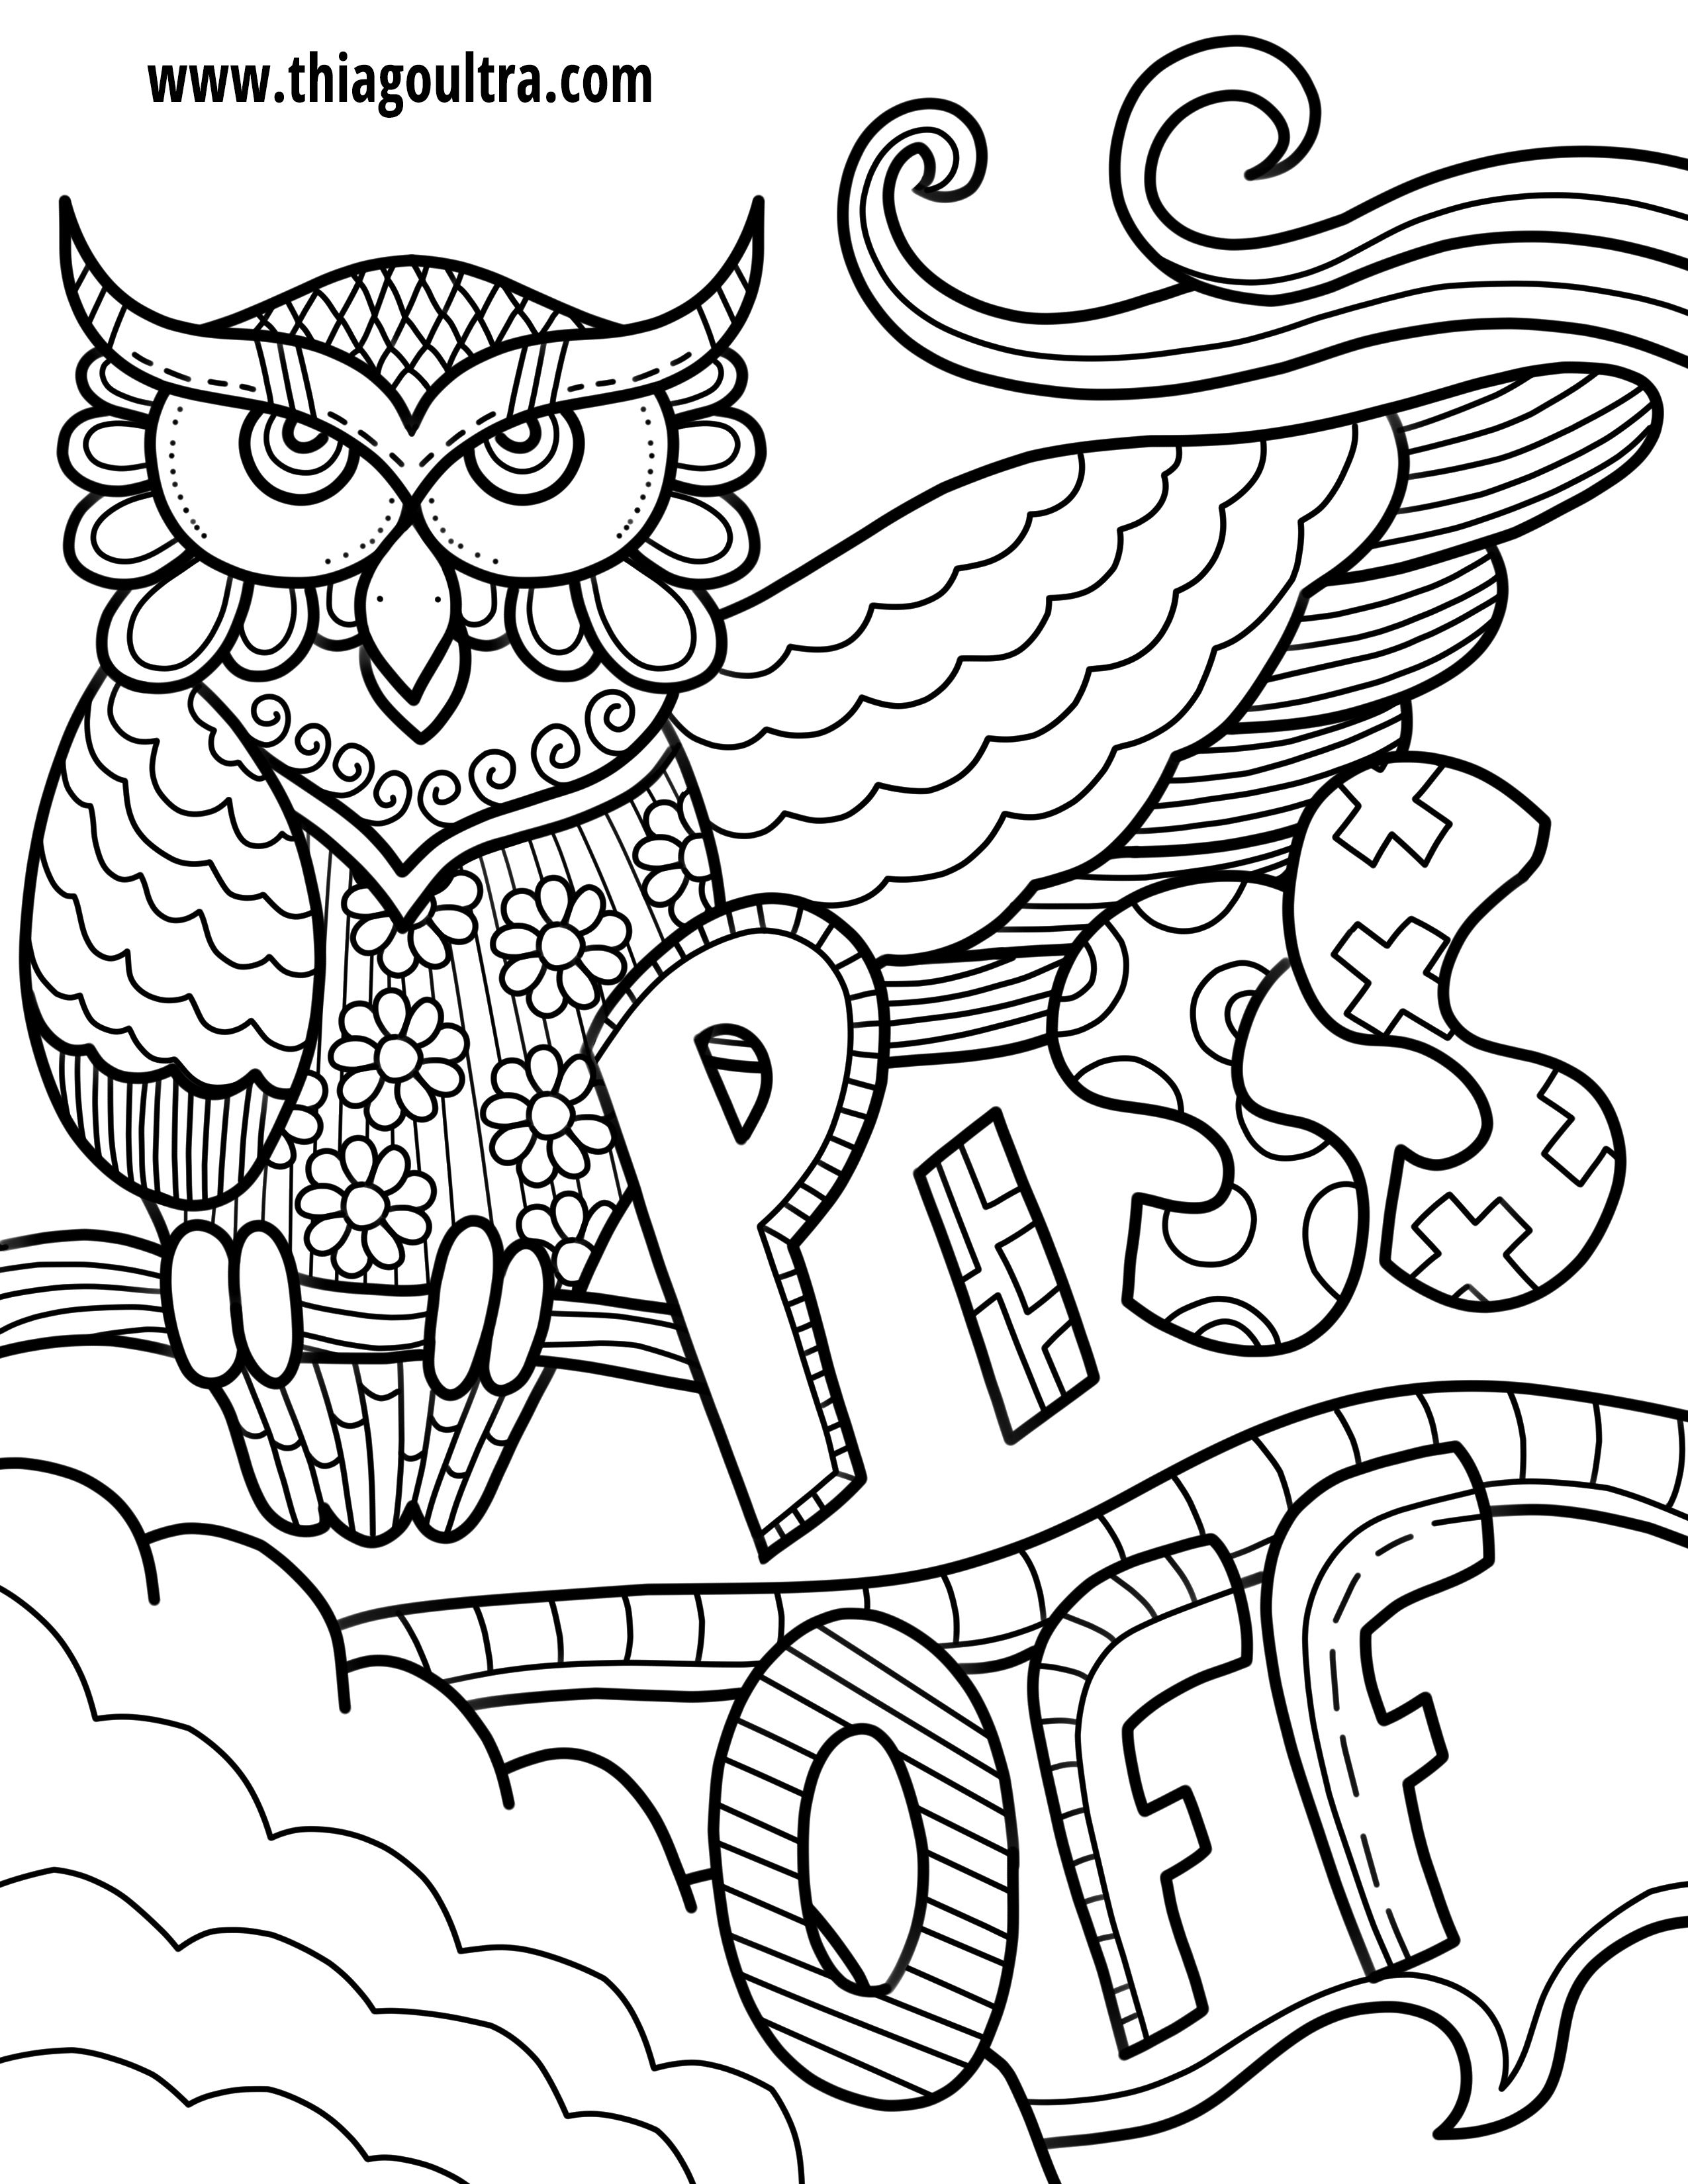 Challenge Free Printable Coloring Pages For Adults Only Swear Words - Free Printable Coloring Pages For Adults Only